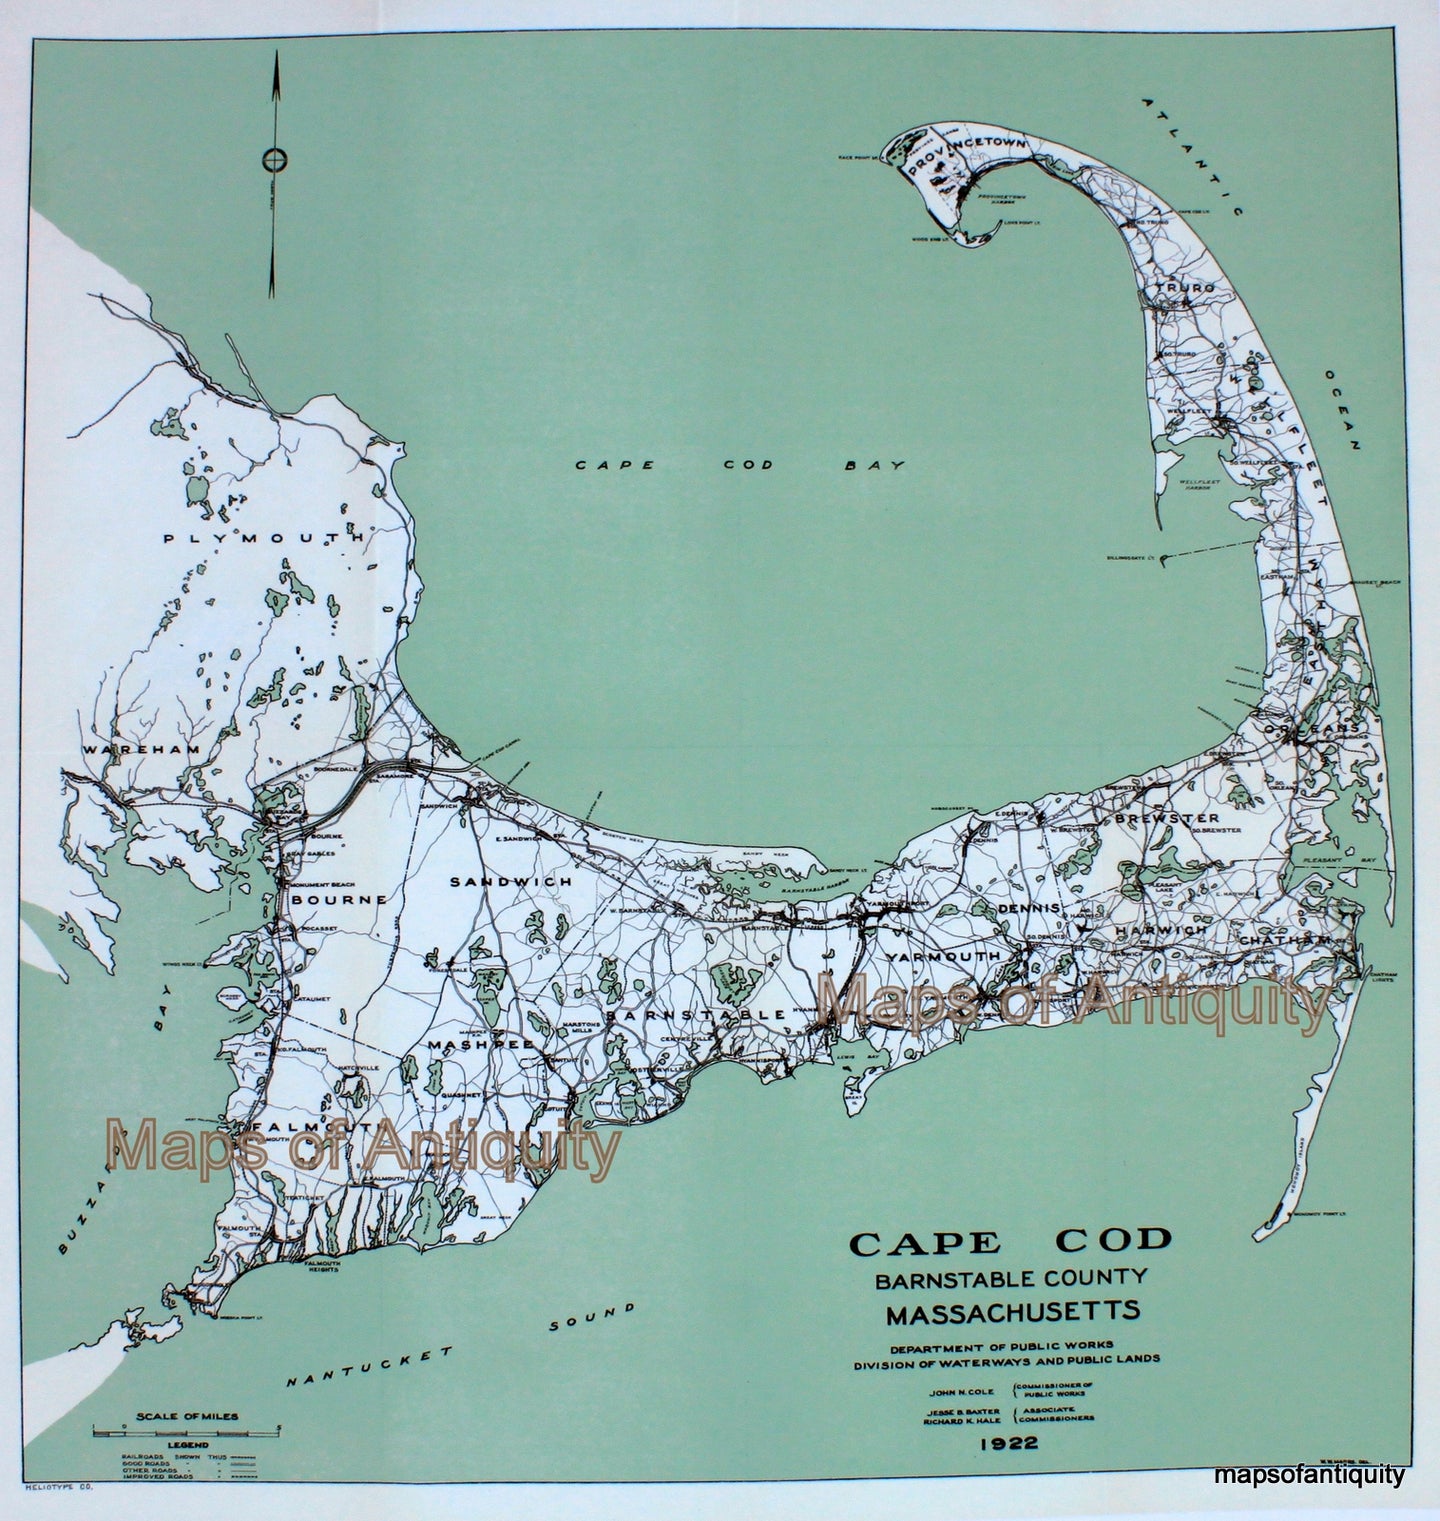 Reproduction-of-Antique-Map-Cape-Cod-1922-Barnstable-County-Massachusetts-Maps-of-Antiquity